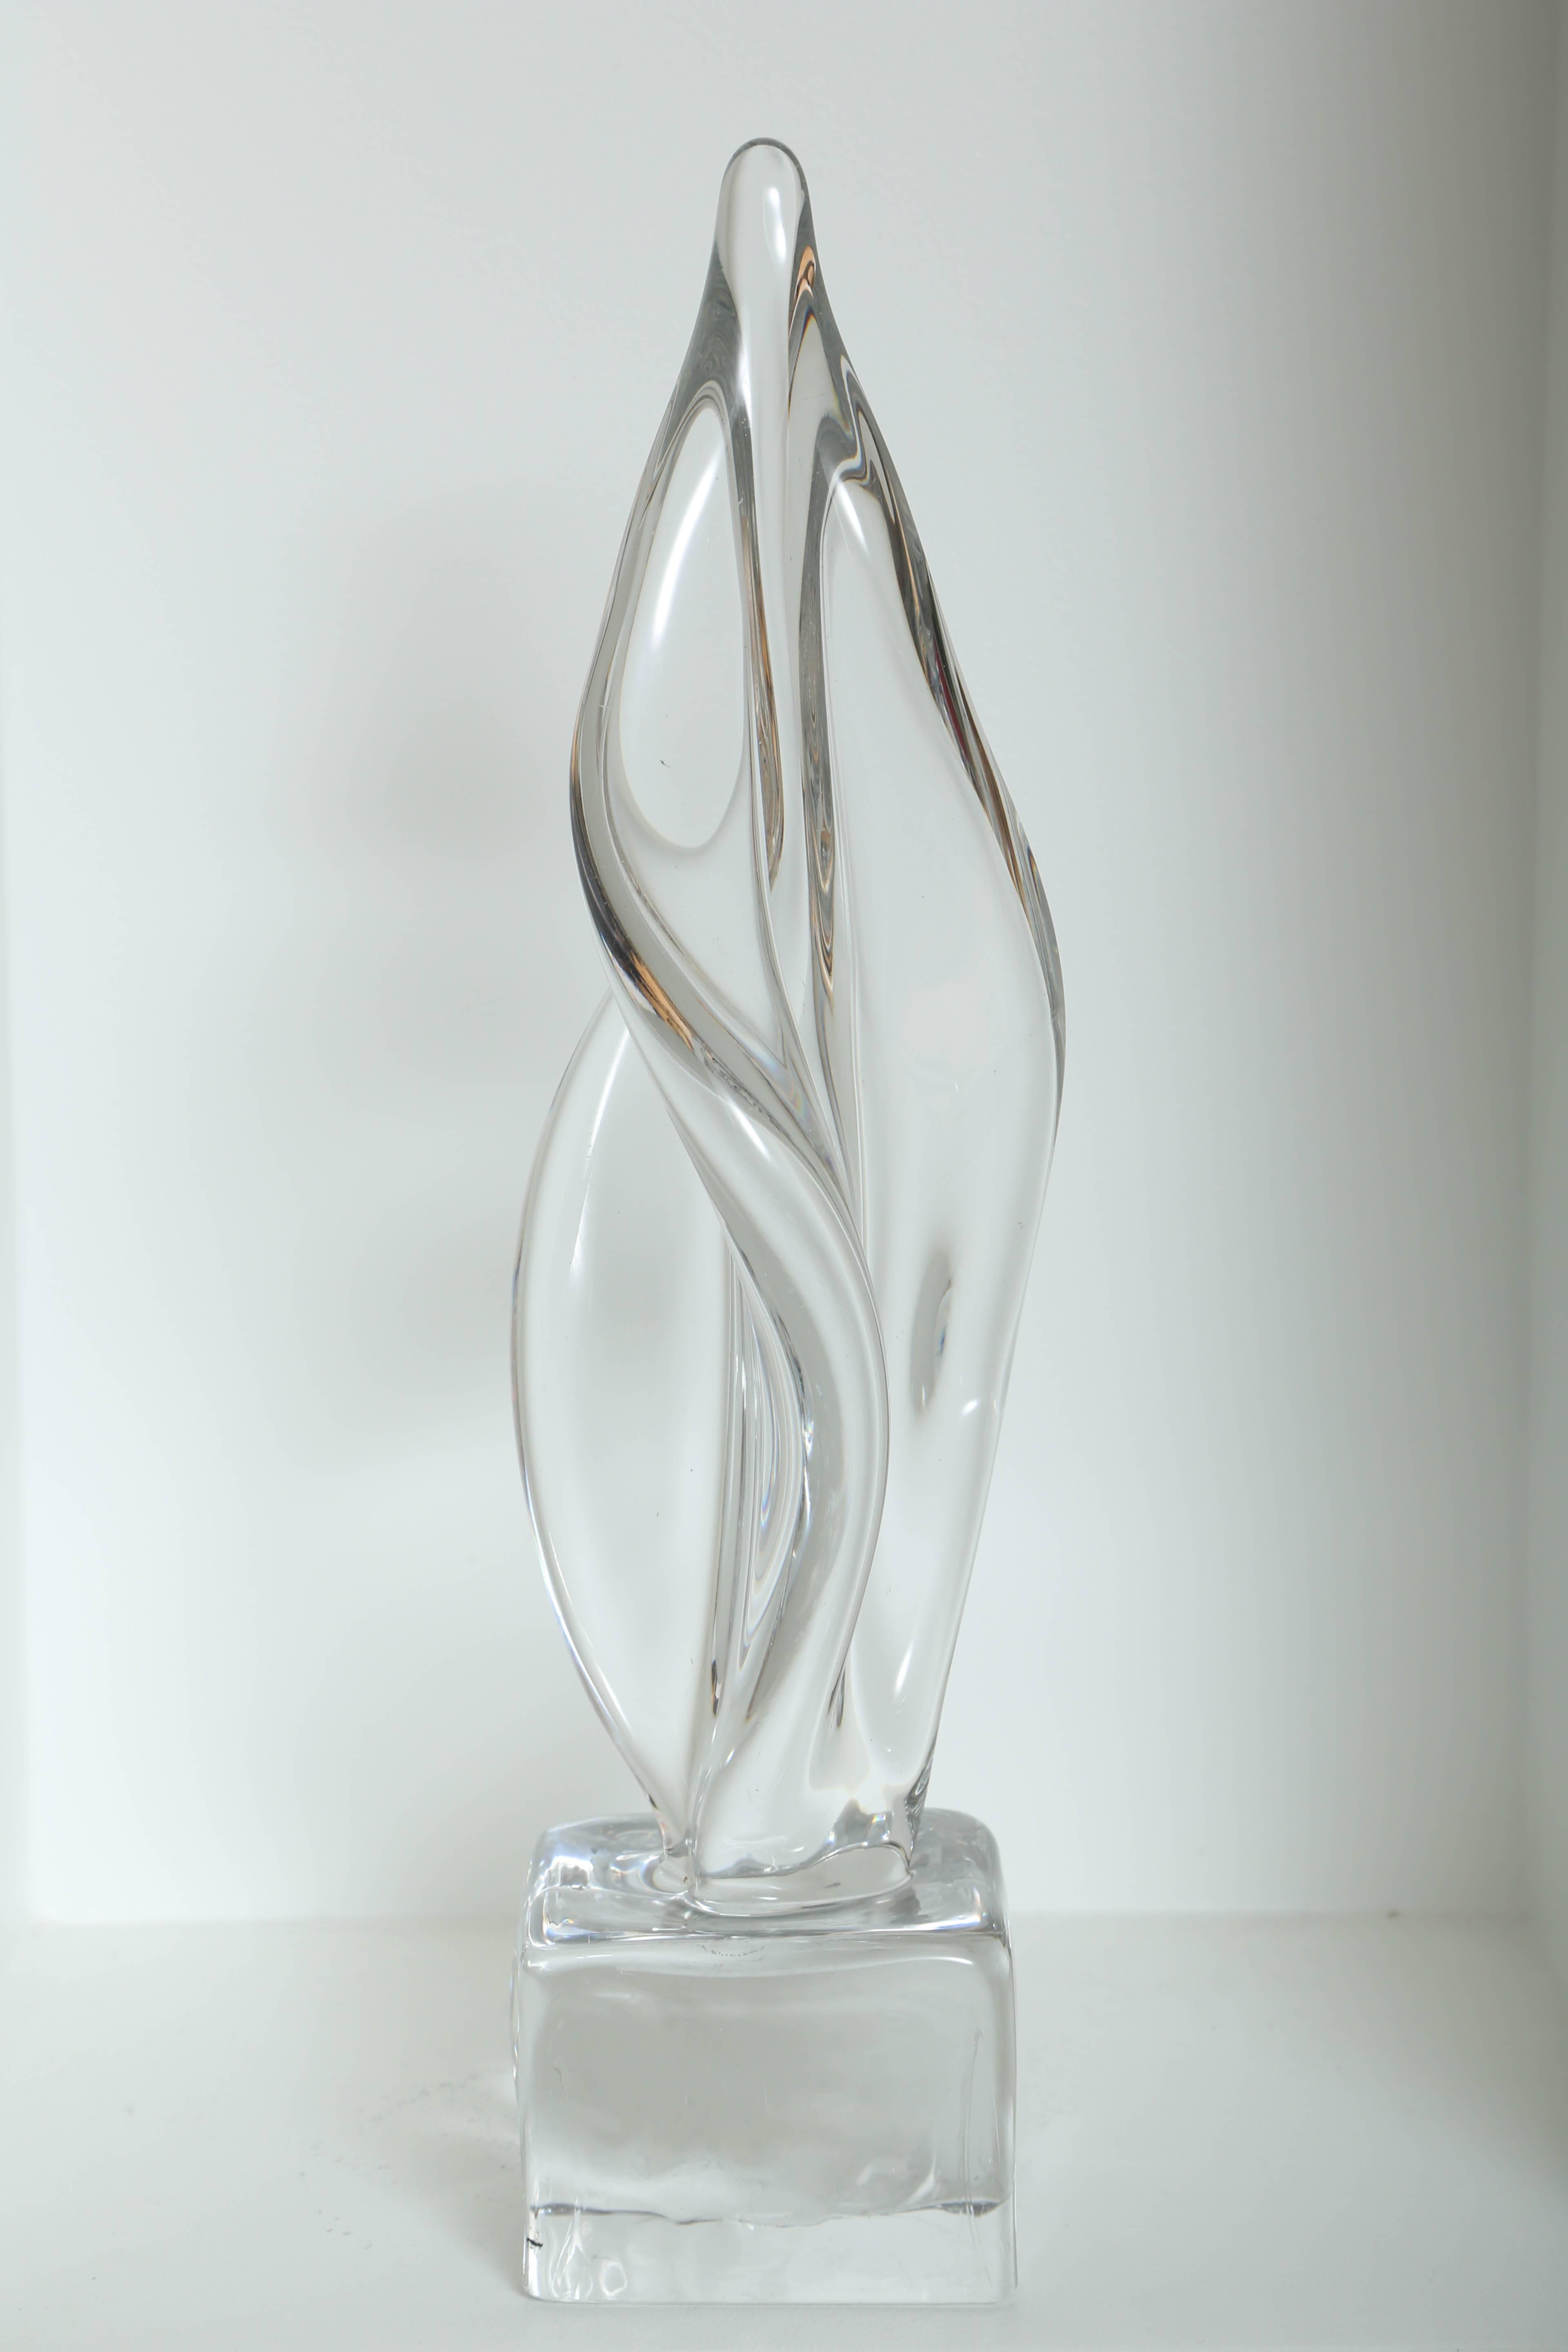 Vintage large abstract sculpture in handblown clear cast Murano glass. Sculpture has spiral form with amorphous design reminiscent of a fire flame, and features square solid glass pedestal base.